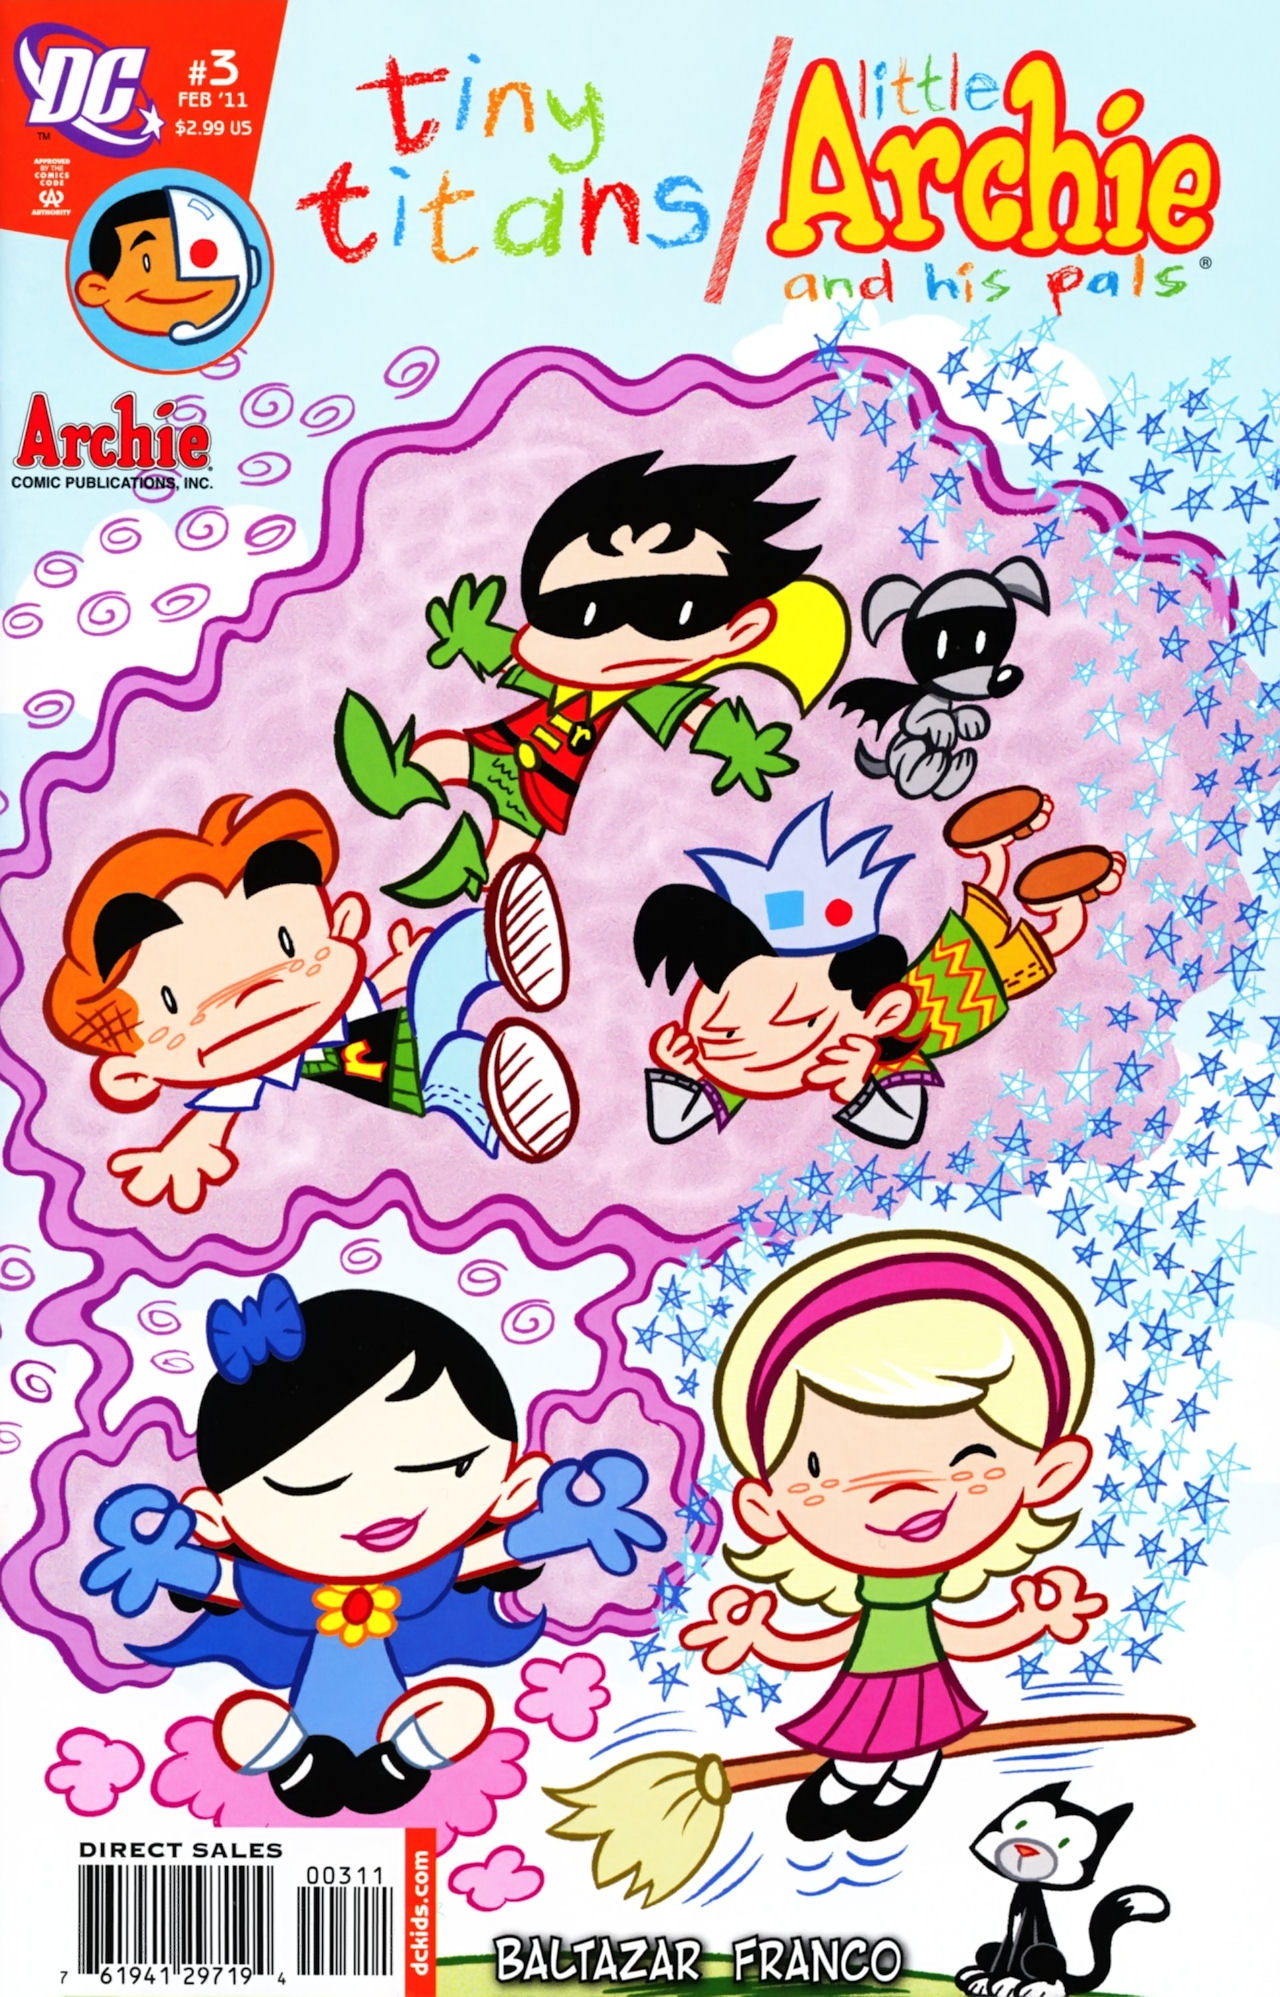 Read online Tiny Titans/Little Archie comic -  Issue #3 - 1